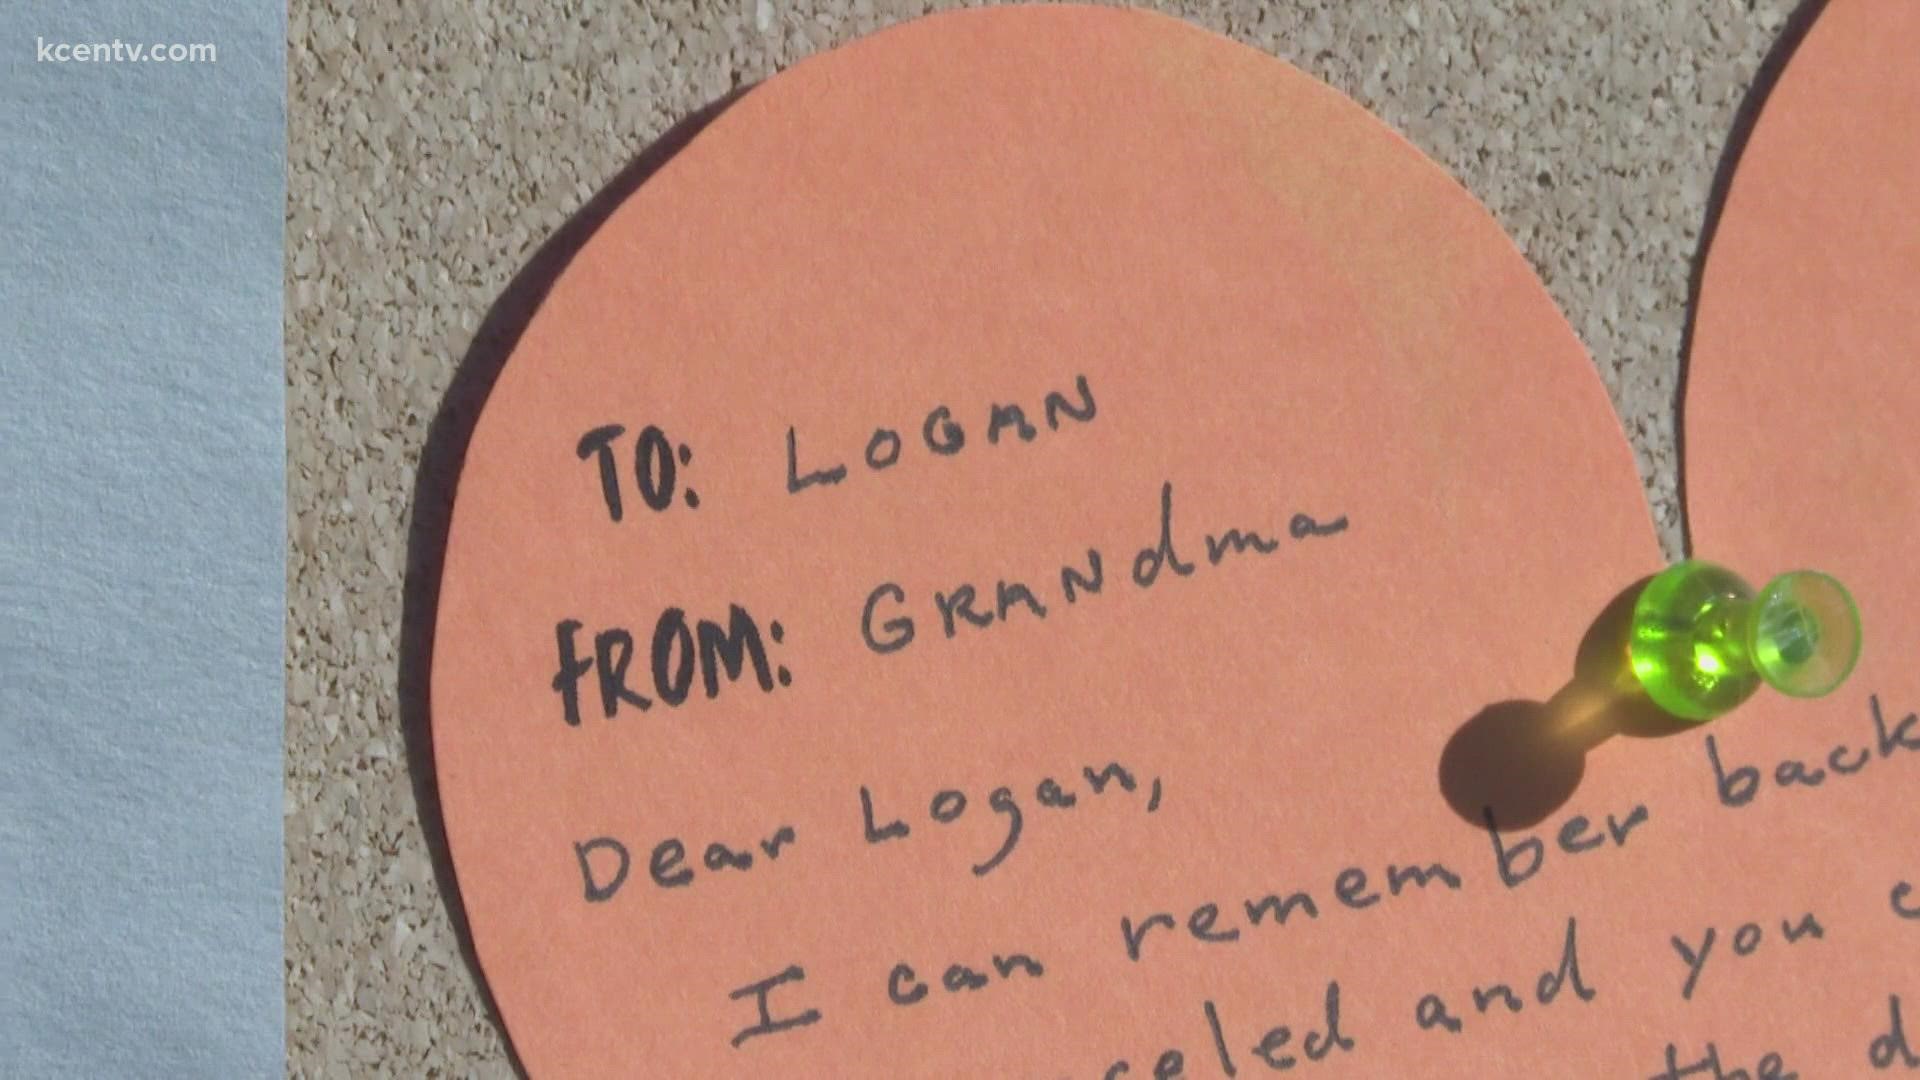 While some exchanged Valentine's Day cards and treats, a group of Central Texans used the day to honor loved ones who died during the pandemic.